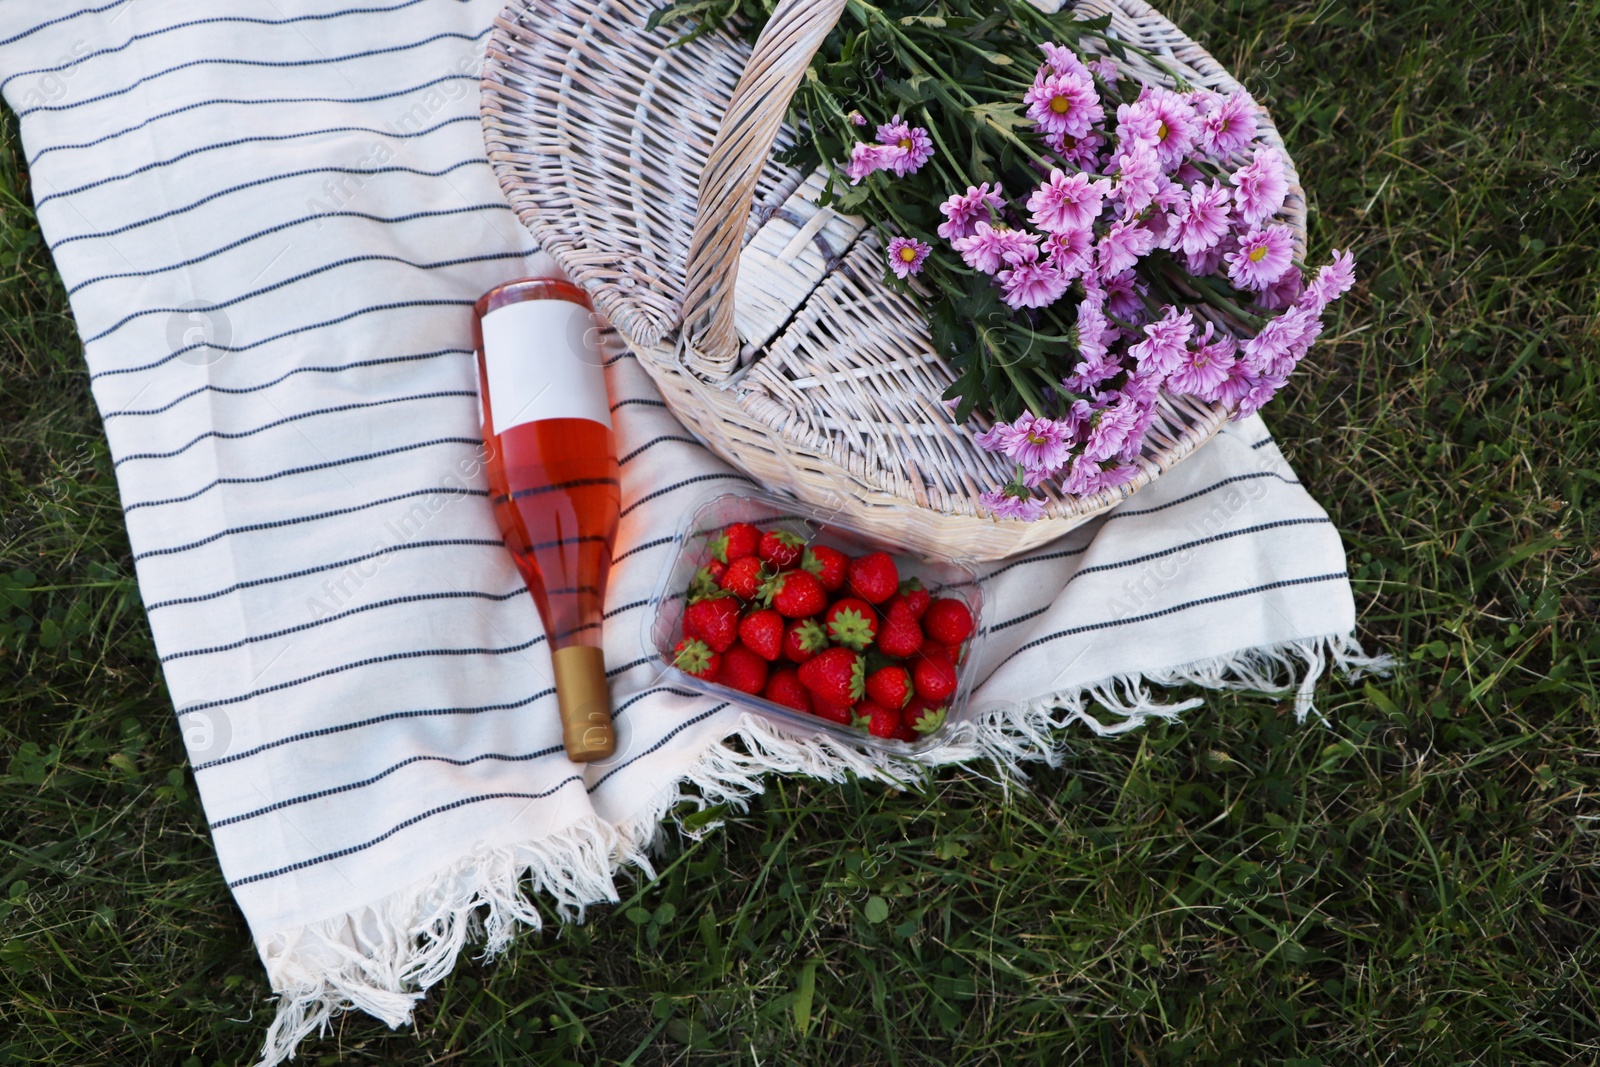 Photo of Picnic basket, flowers, bottle of wine and strawberries on blanket outdoors